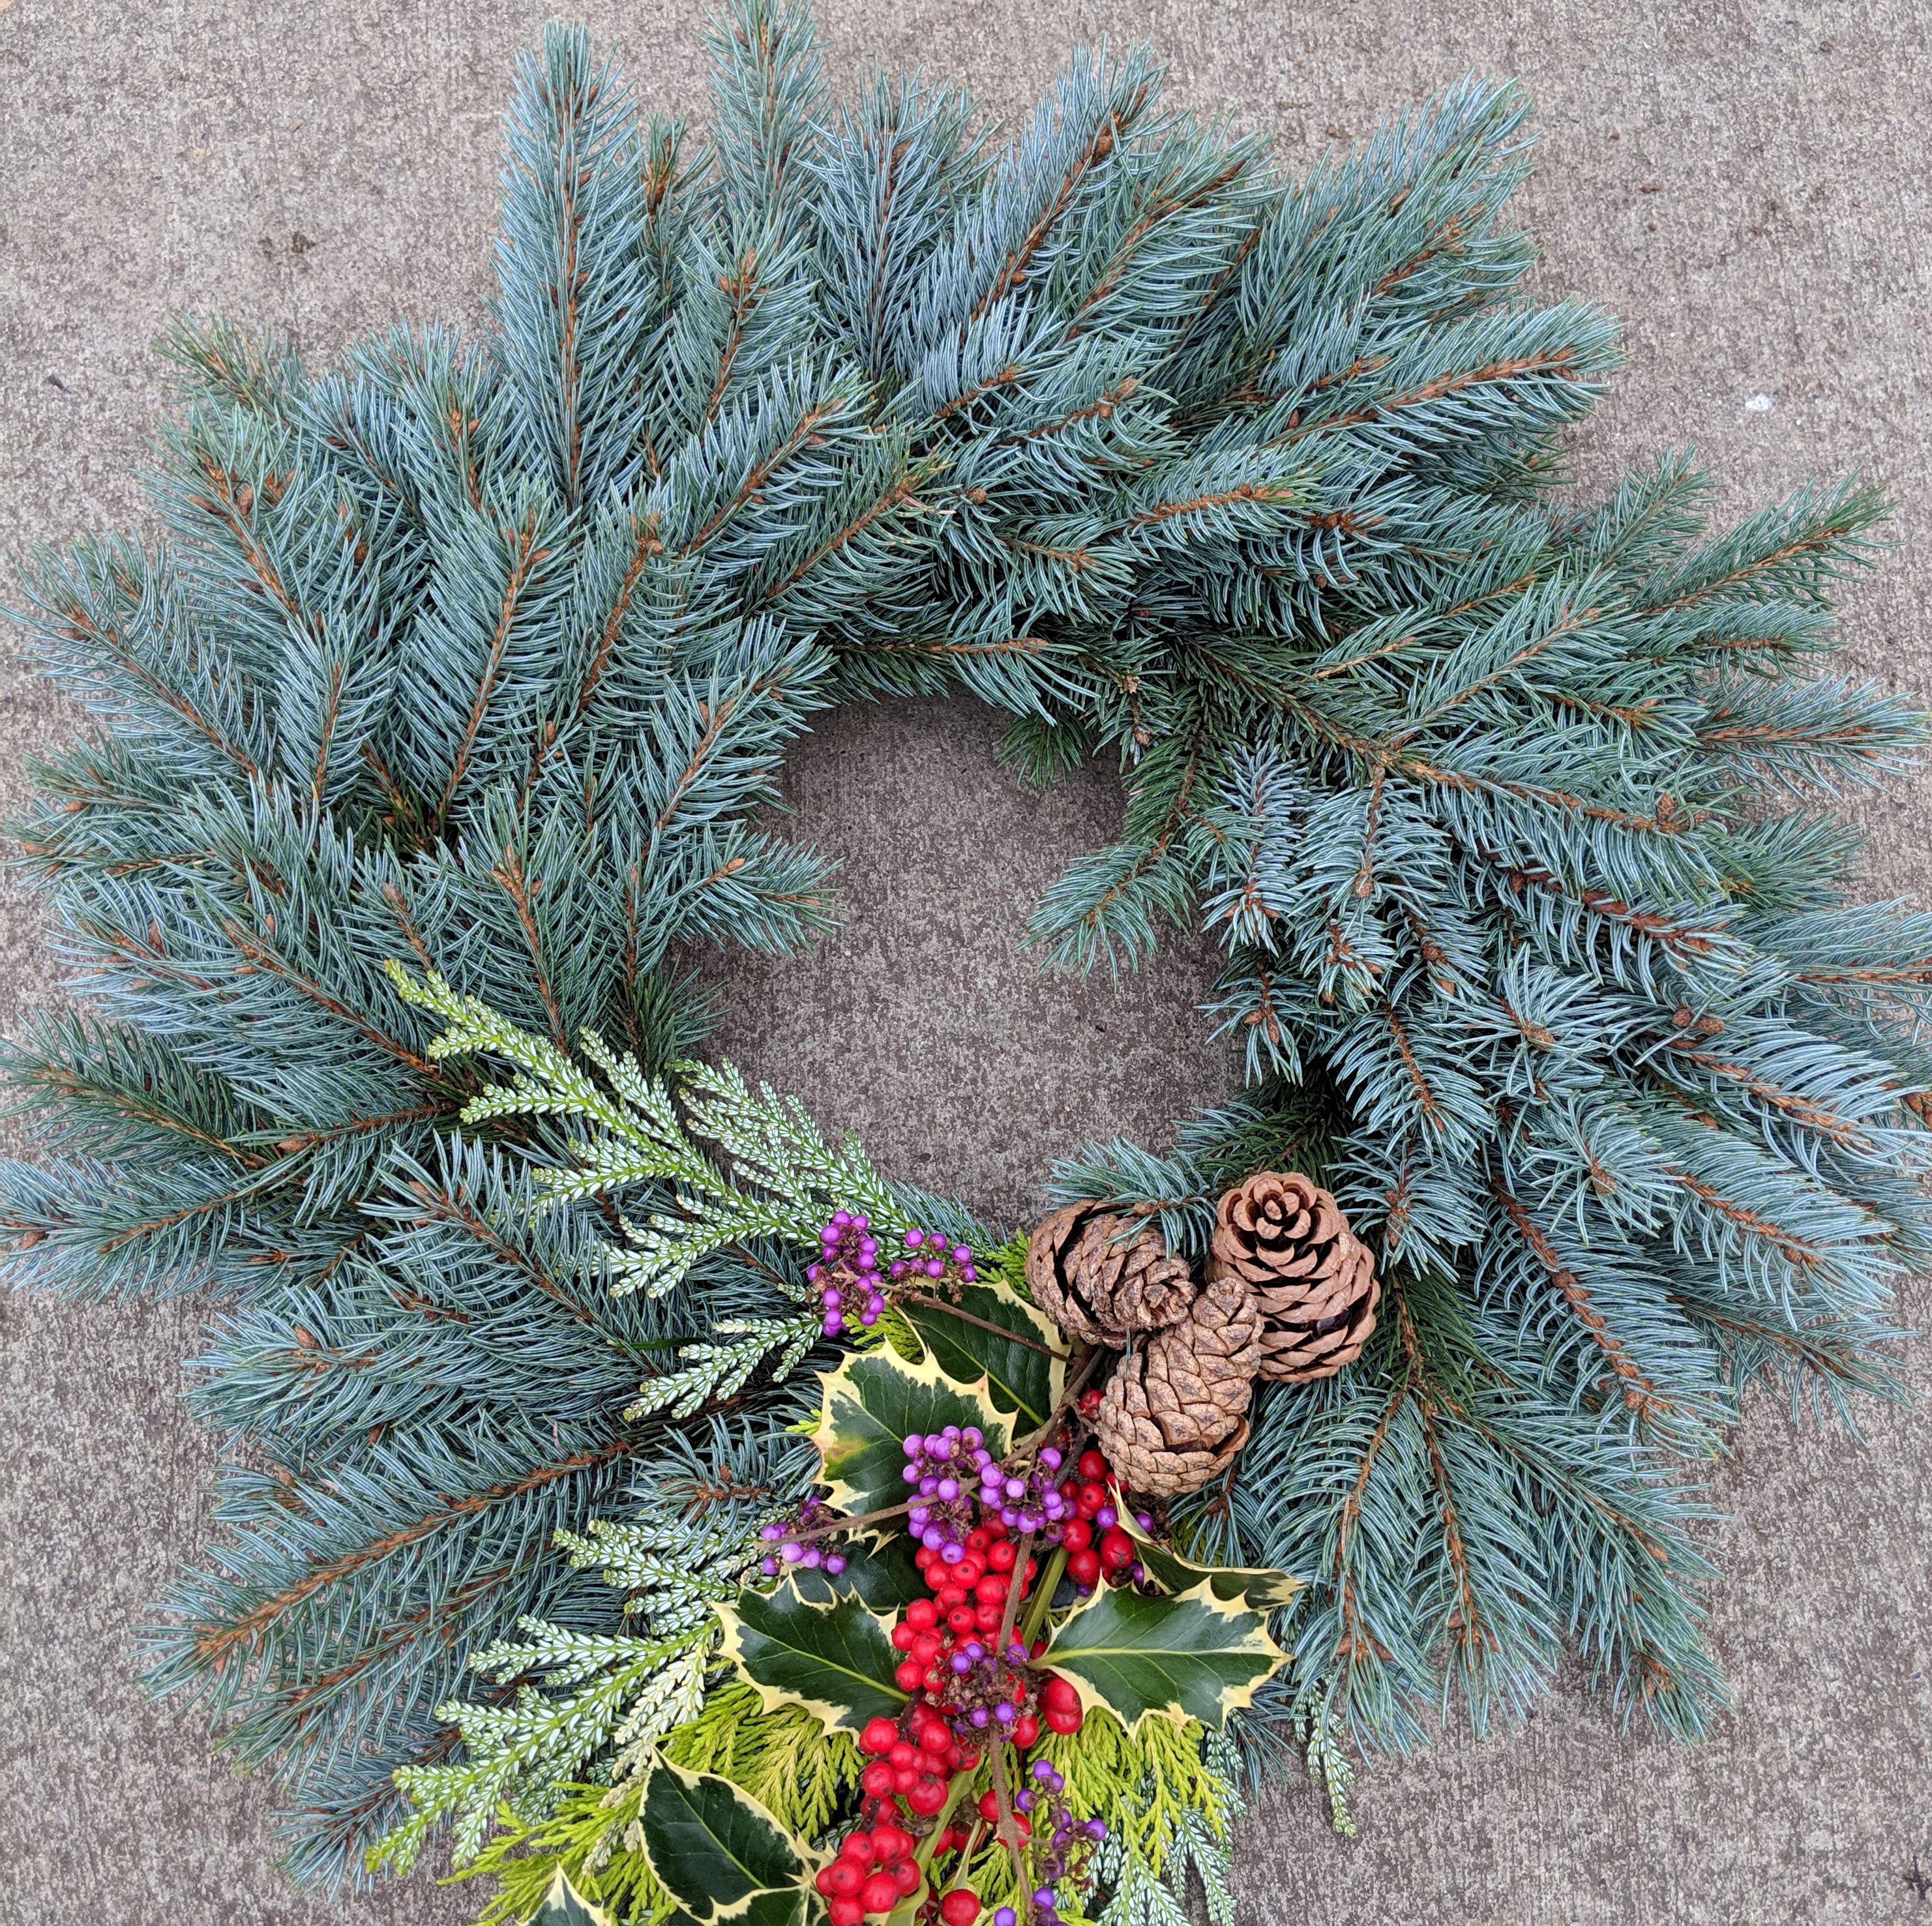 Wreaths and Greenery